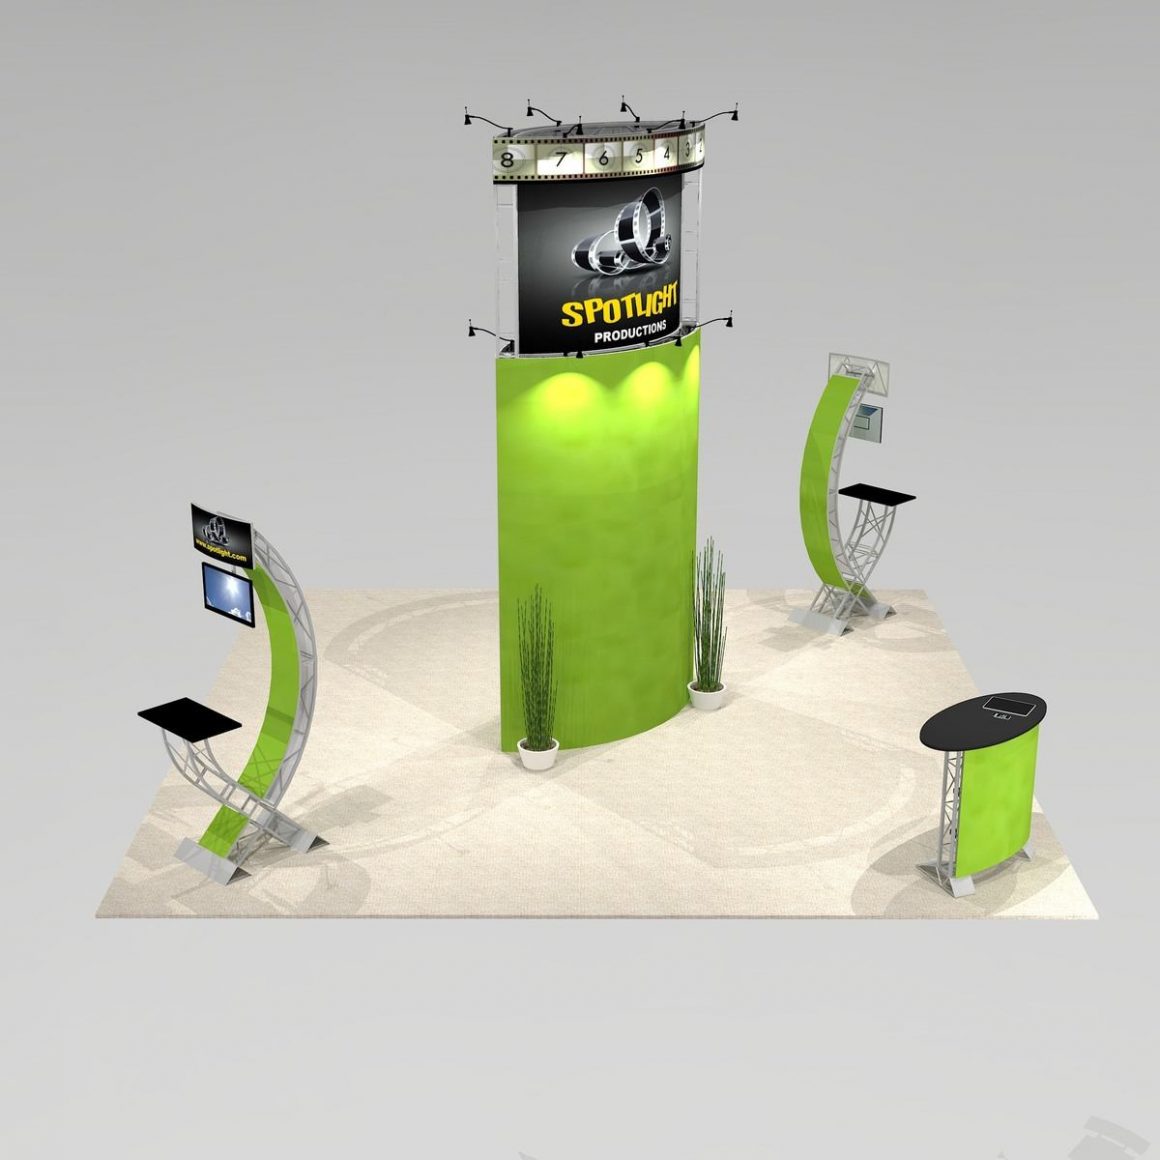 Minimal layout and Stylish trade show exhibit design COR2020 Graphic Package A